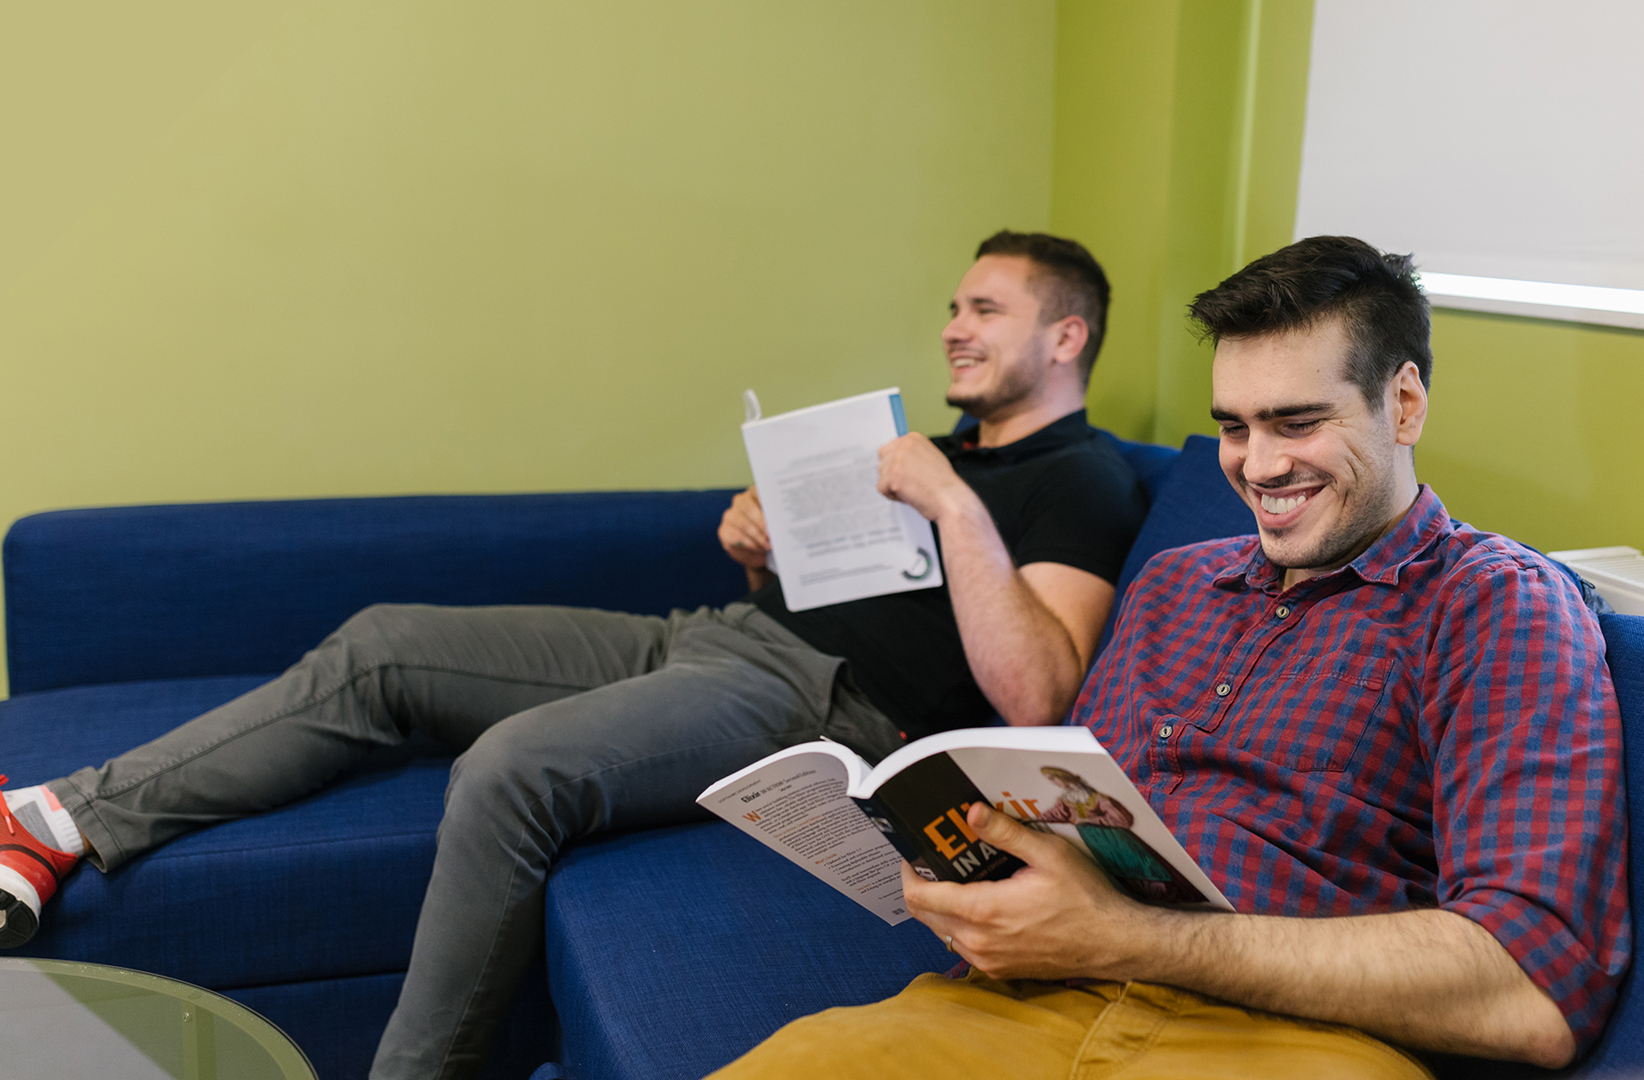 Two men sitting on a couch reading books.